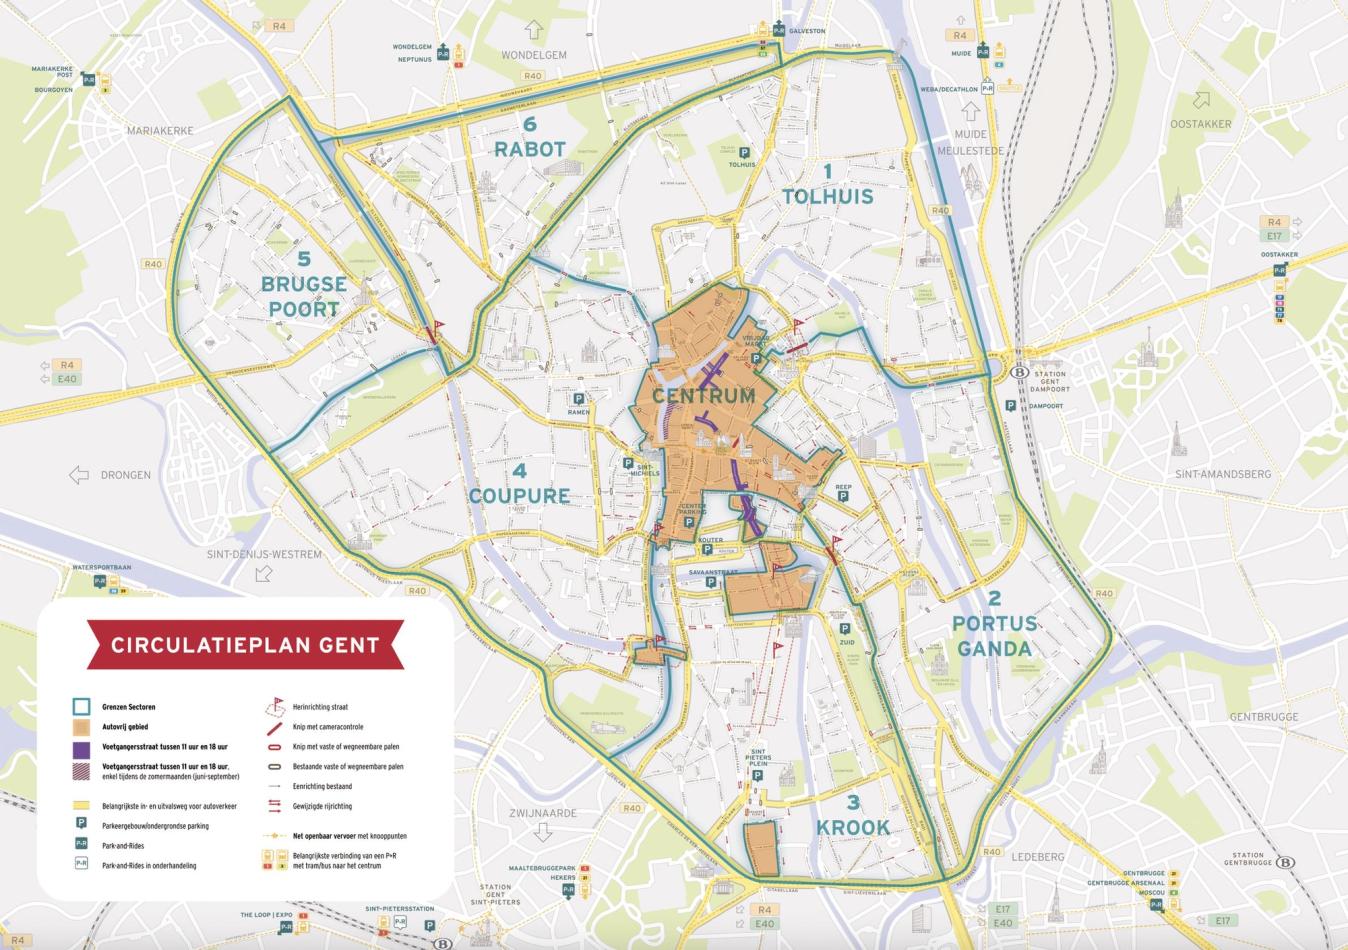 Gent's circulation plan: cars must use the ringroad to move between zones